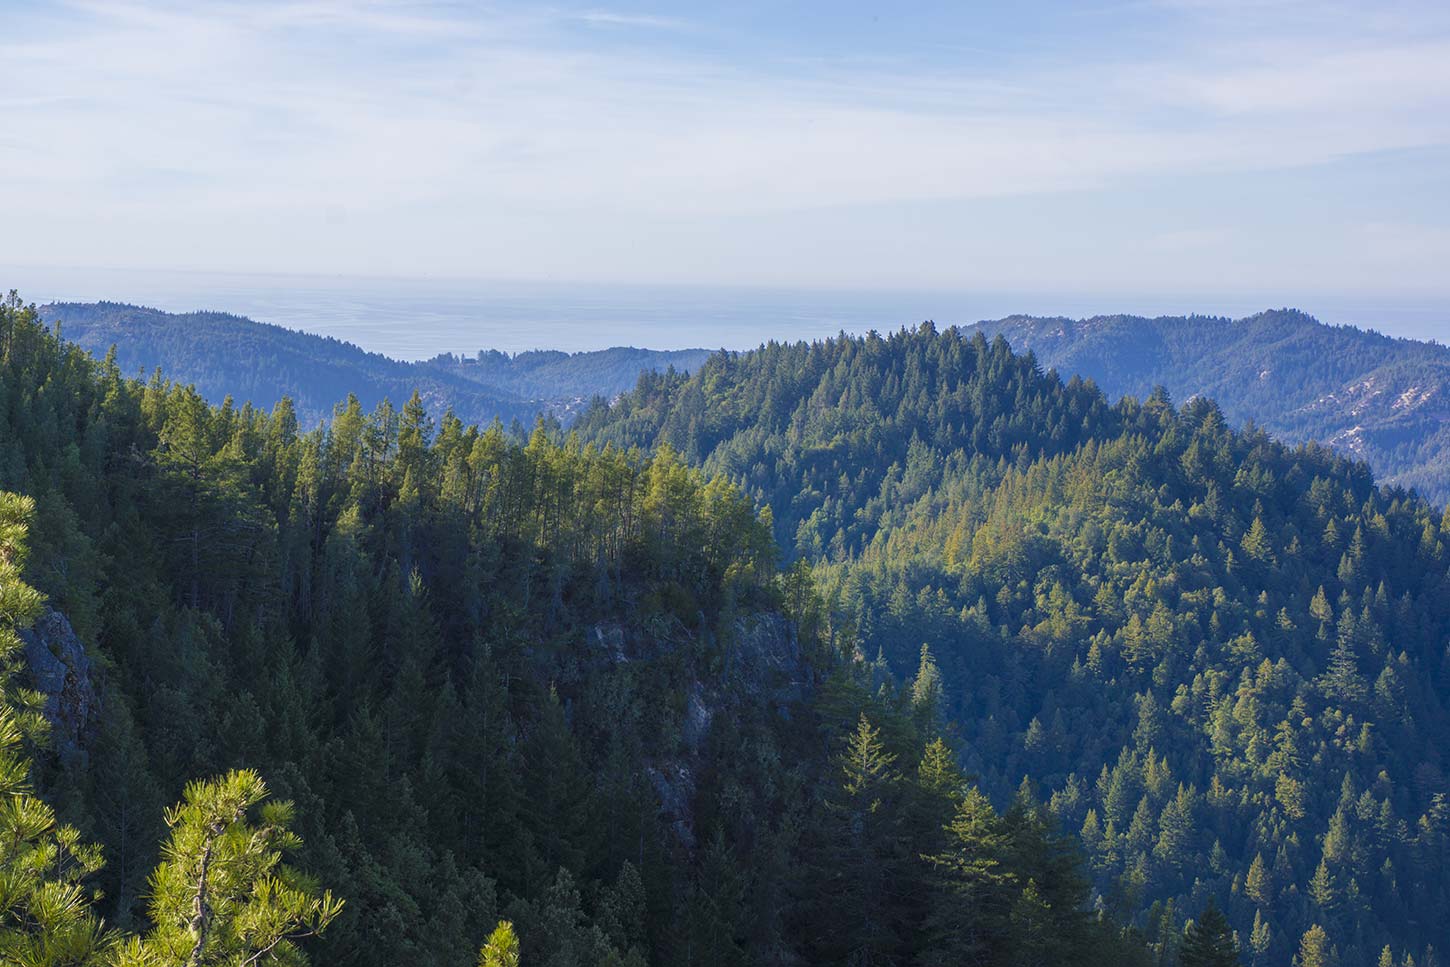 View of Big Basin from Buzzard’s Roost, Big Basin Redwoods State Park